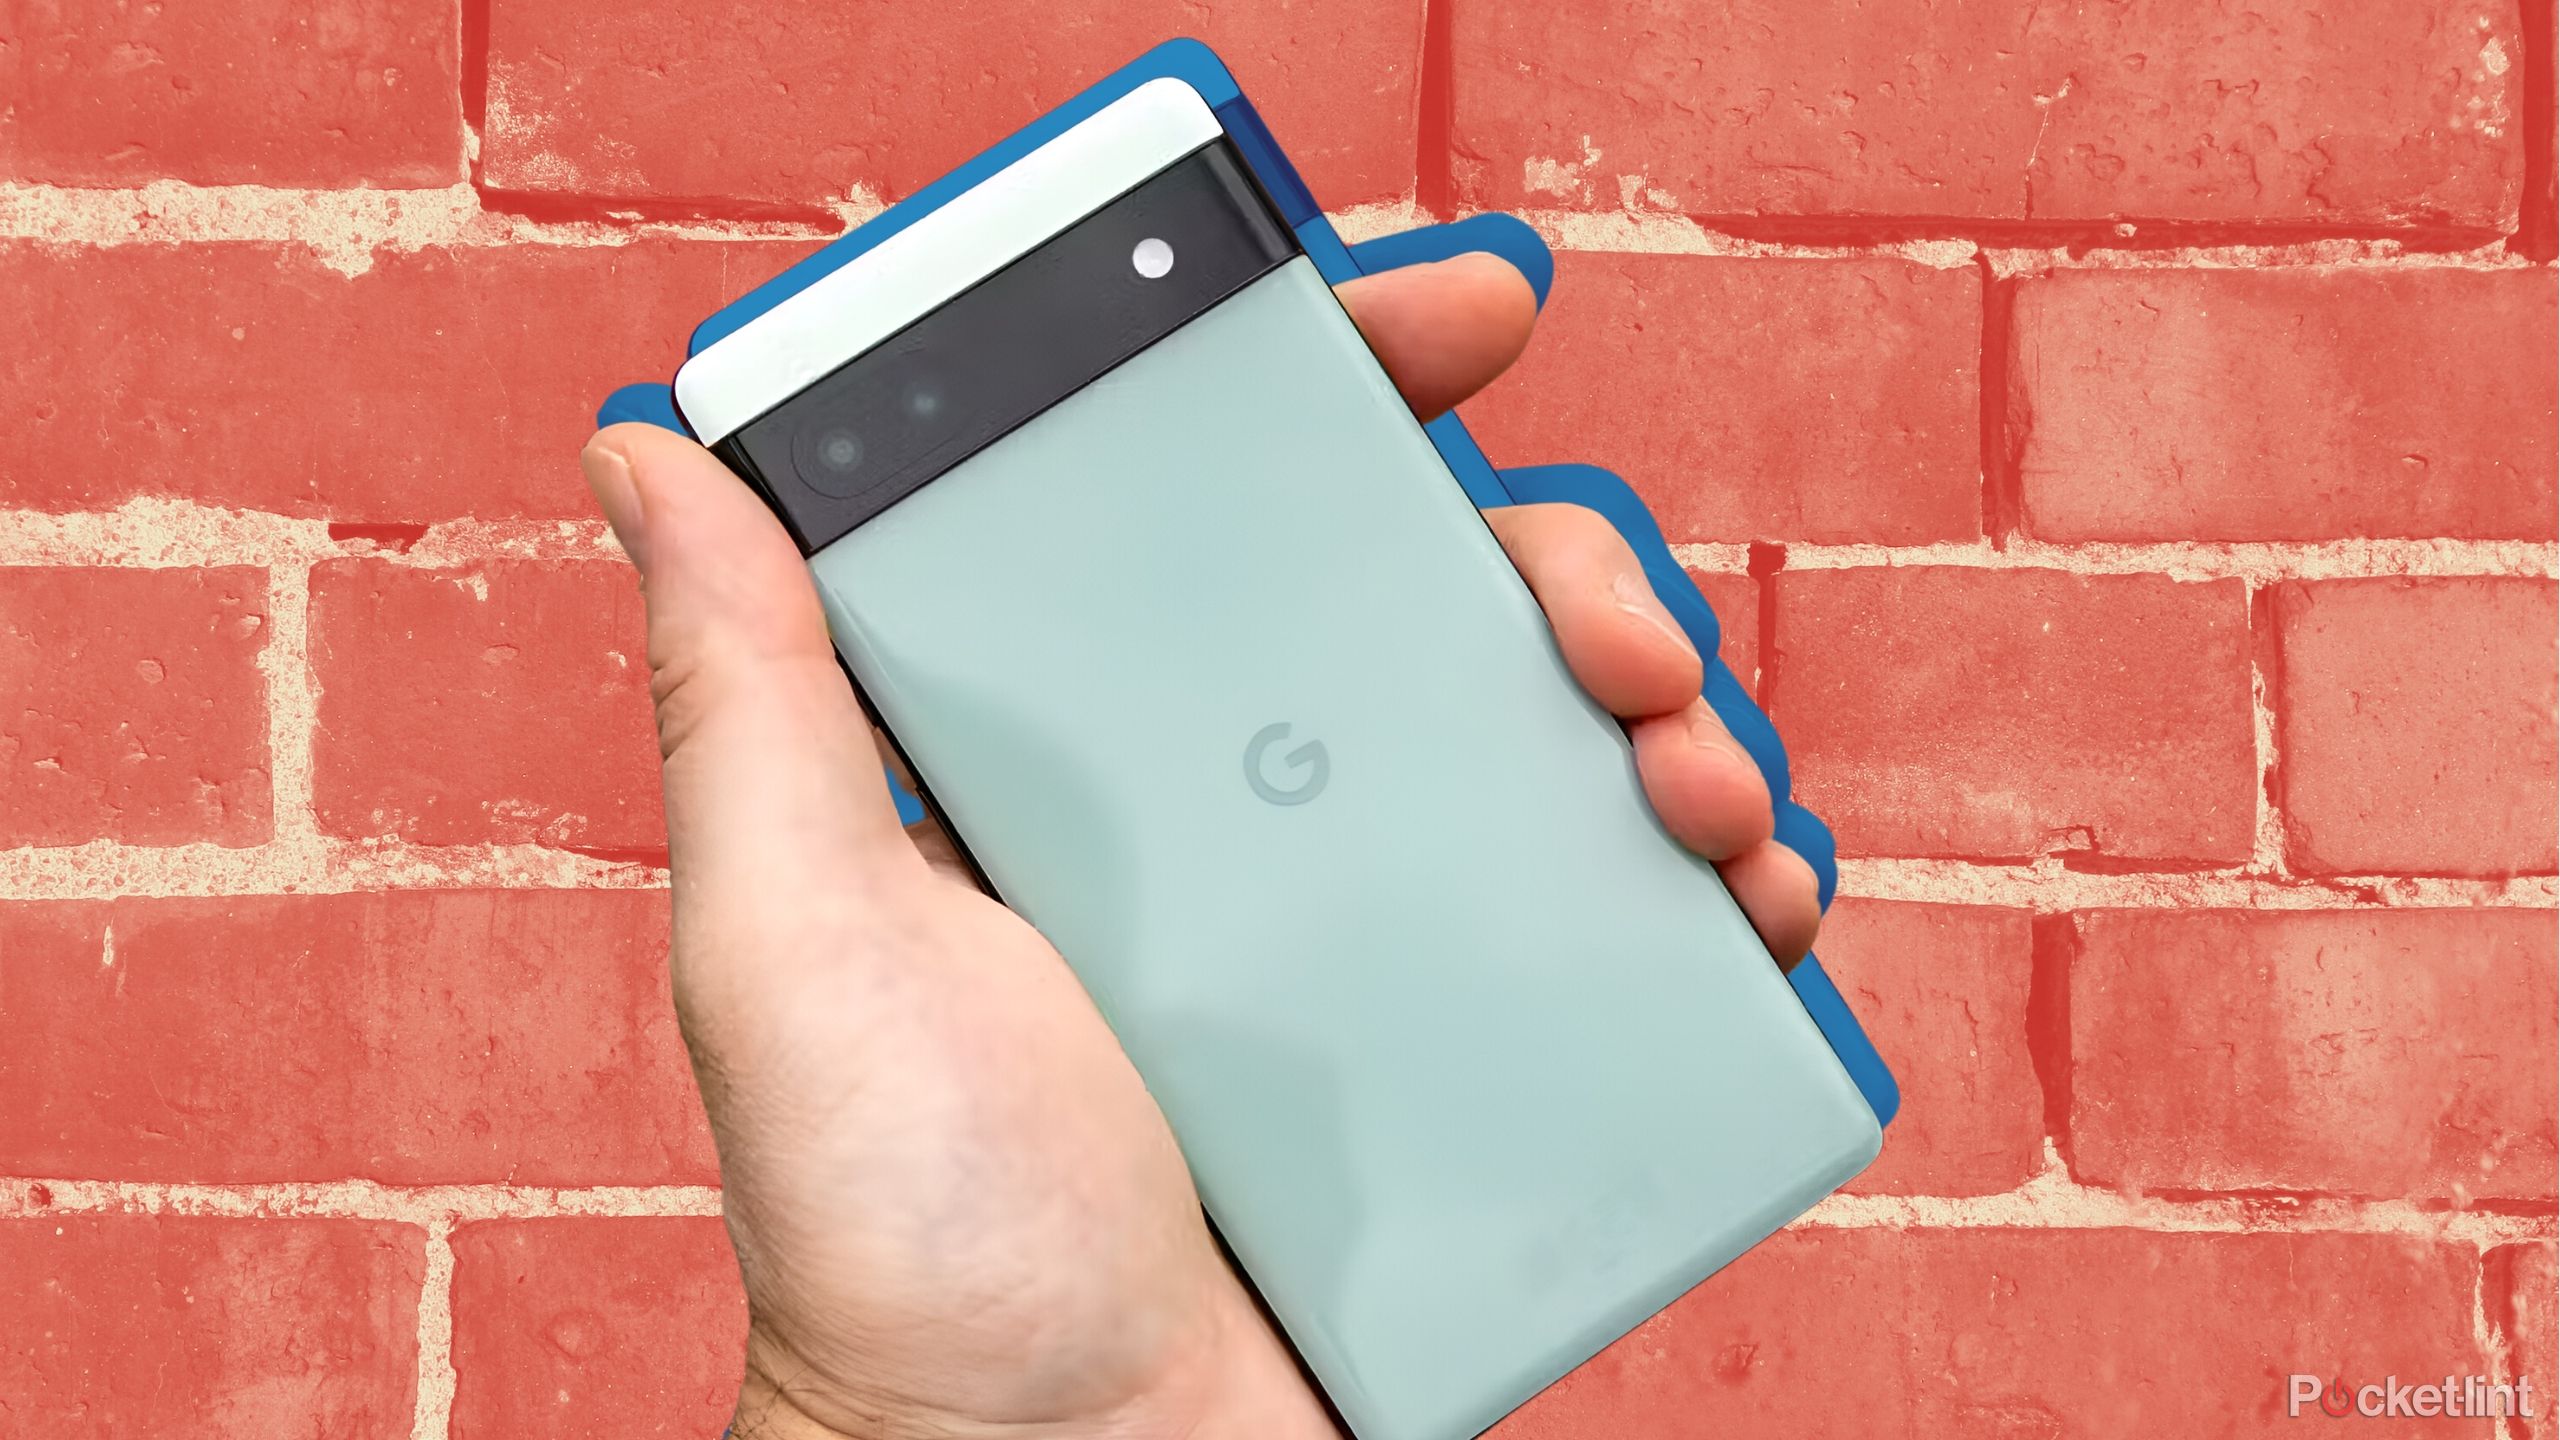 Pixel 6 phone in hand in front of brick stylized wall